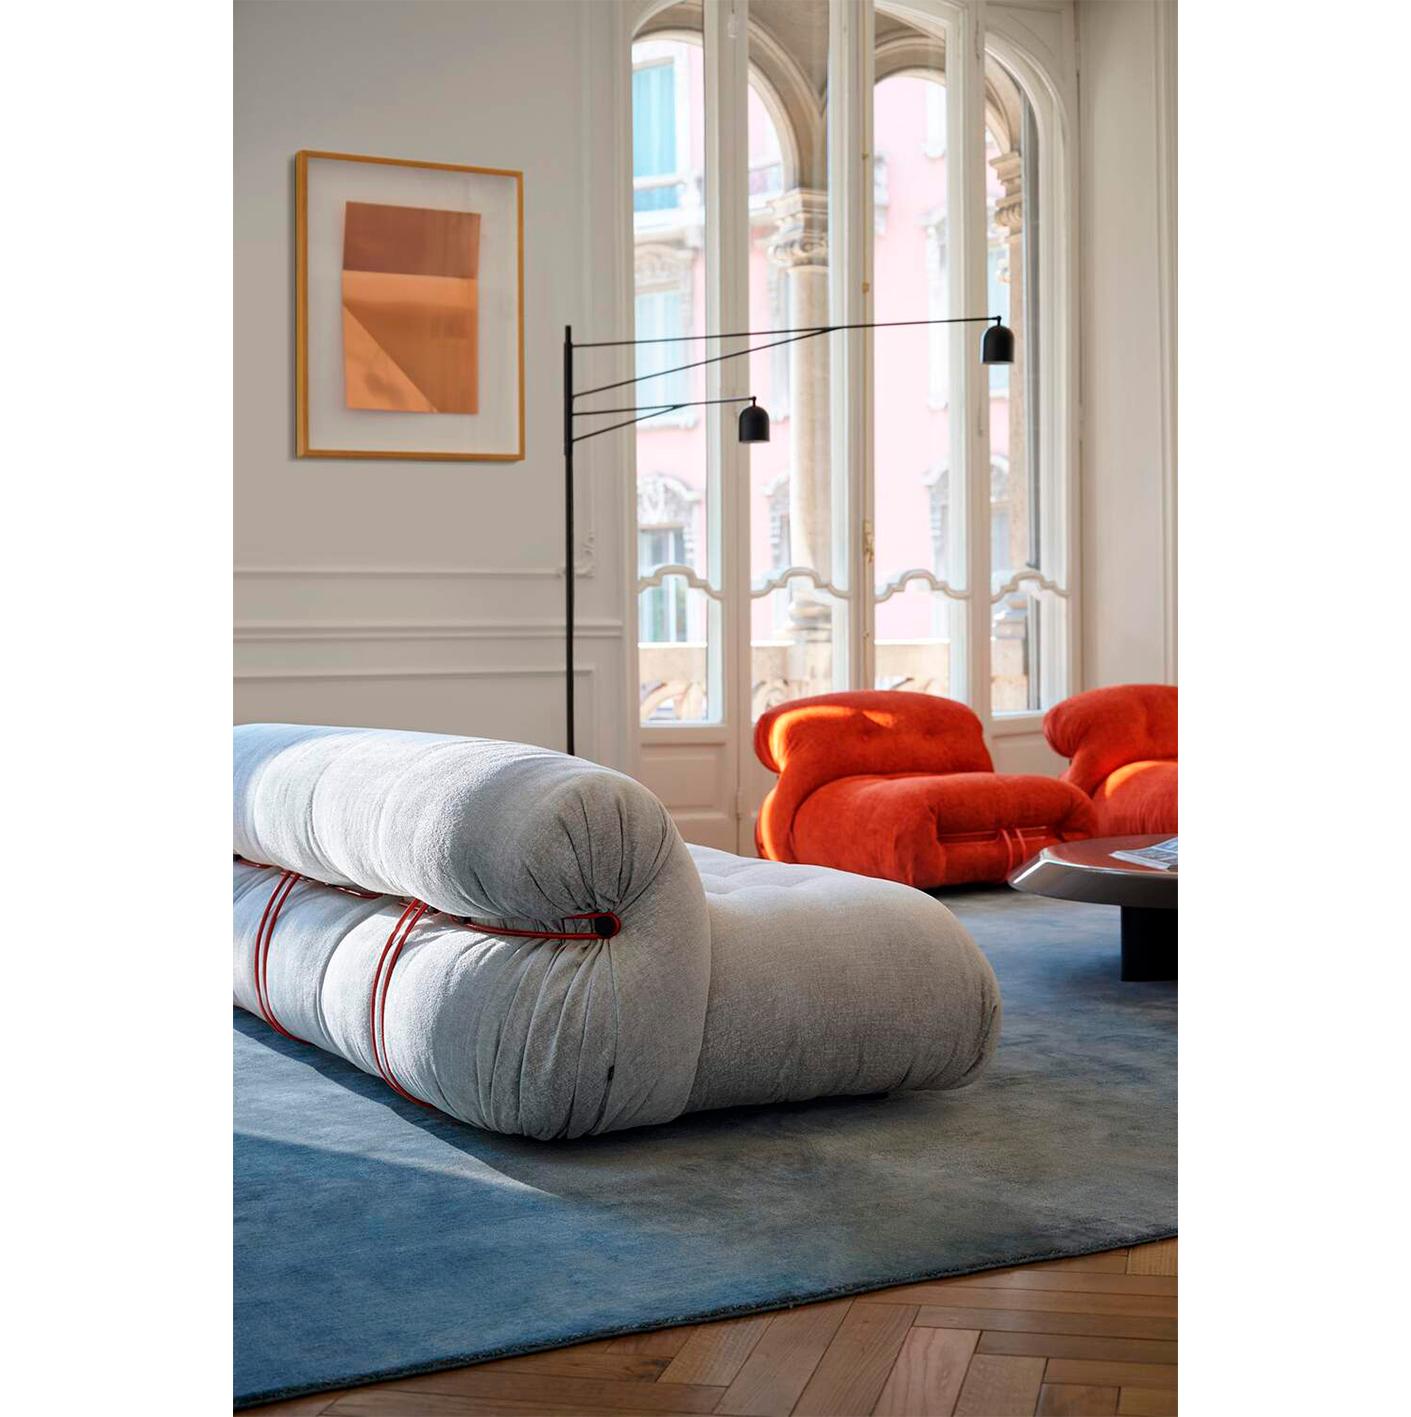 Three Seater sofa model Soriana designed by Tobia Scarpa in 1969.
Manufactured by Cassina in Italy.

A design armchair with soft, generous contours, designed to bring home casual, sophisticated comfort that opens the door to new, freer lifestyles.